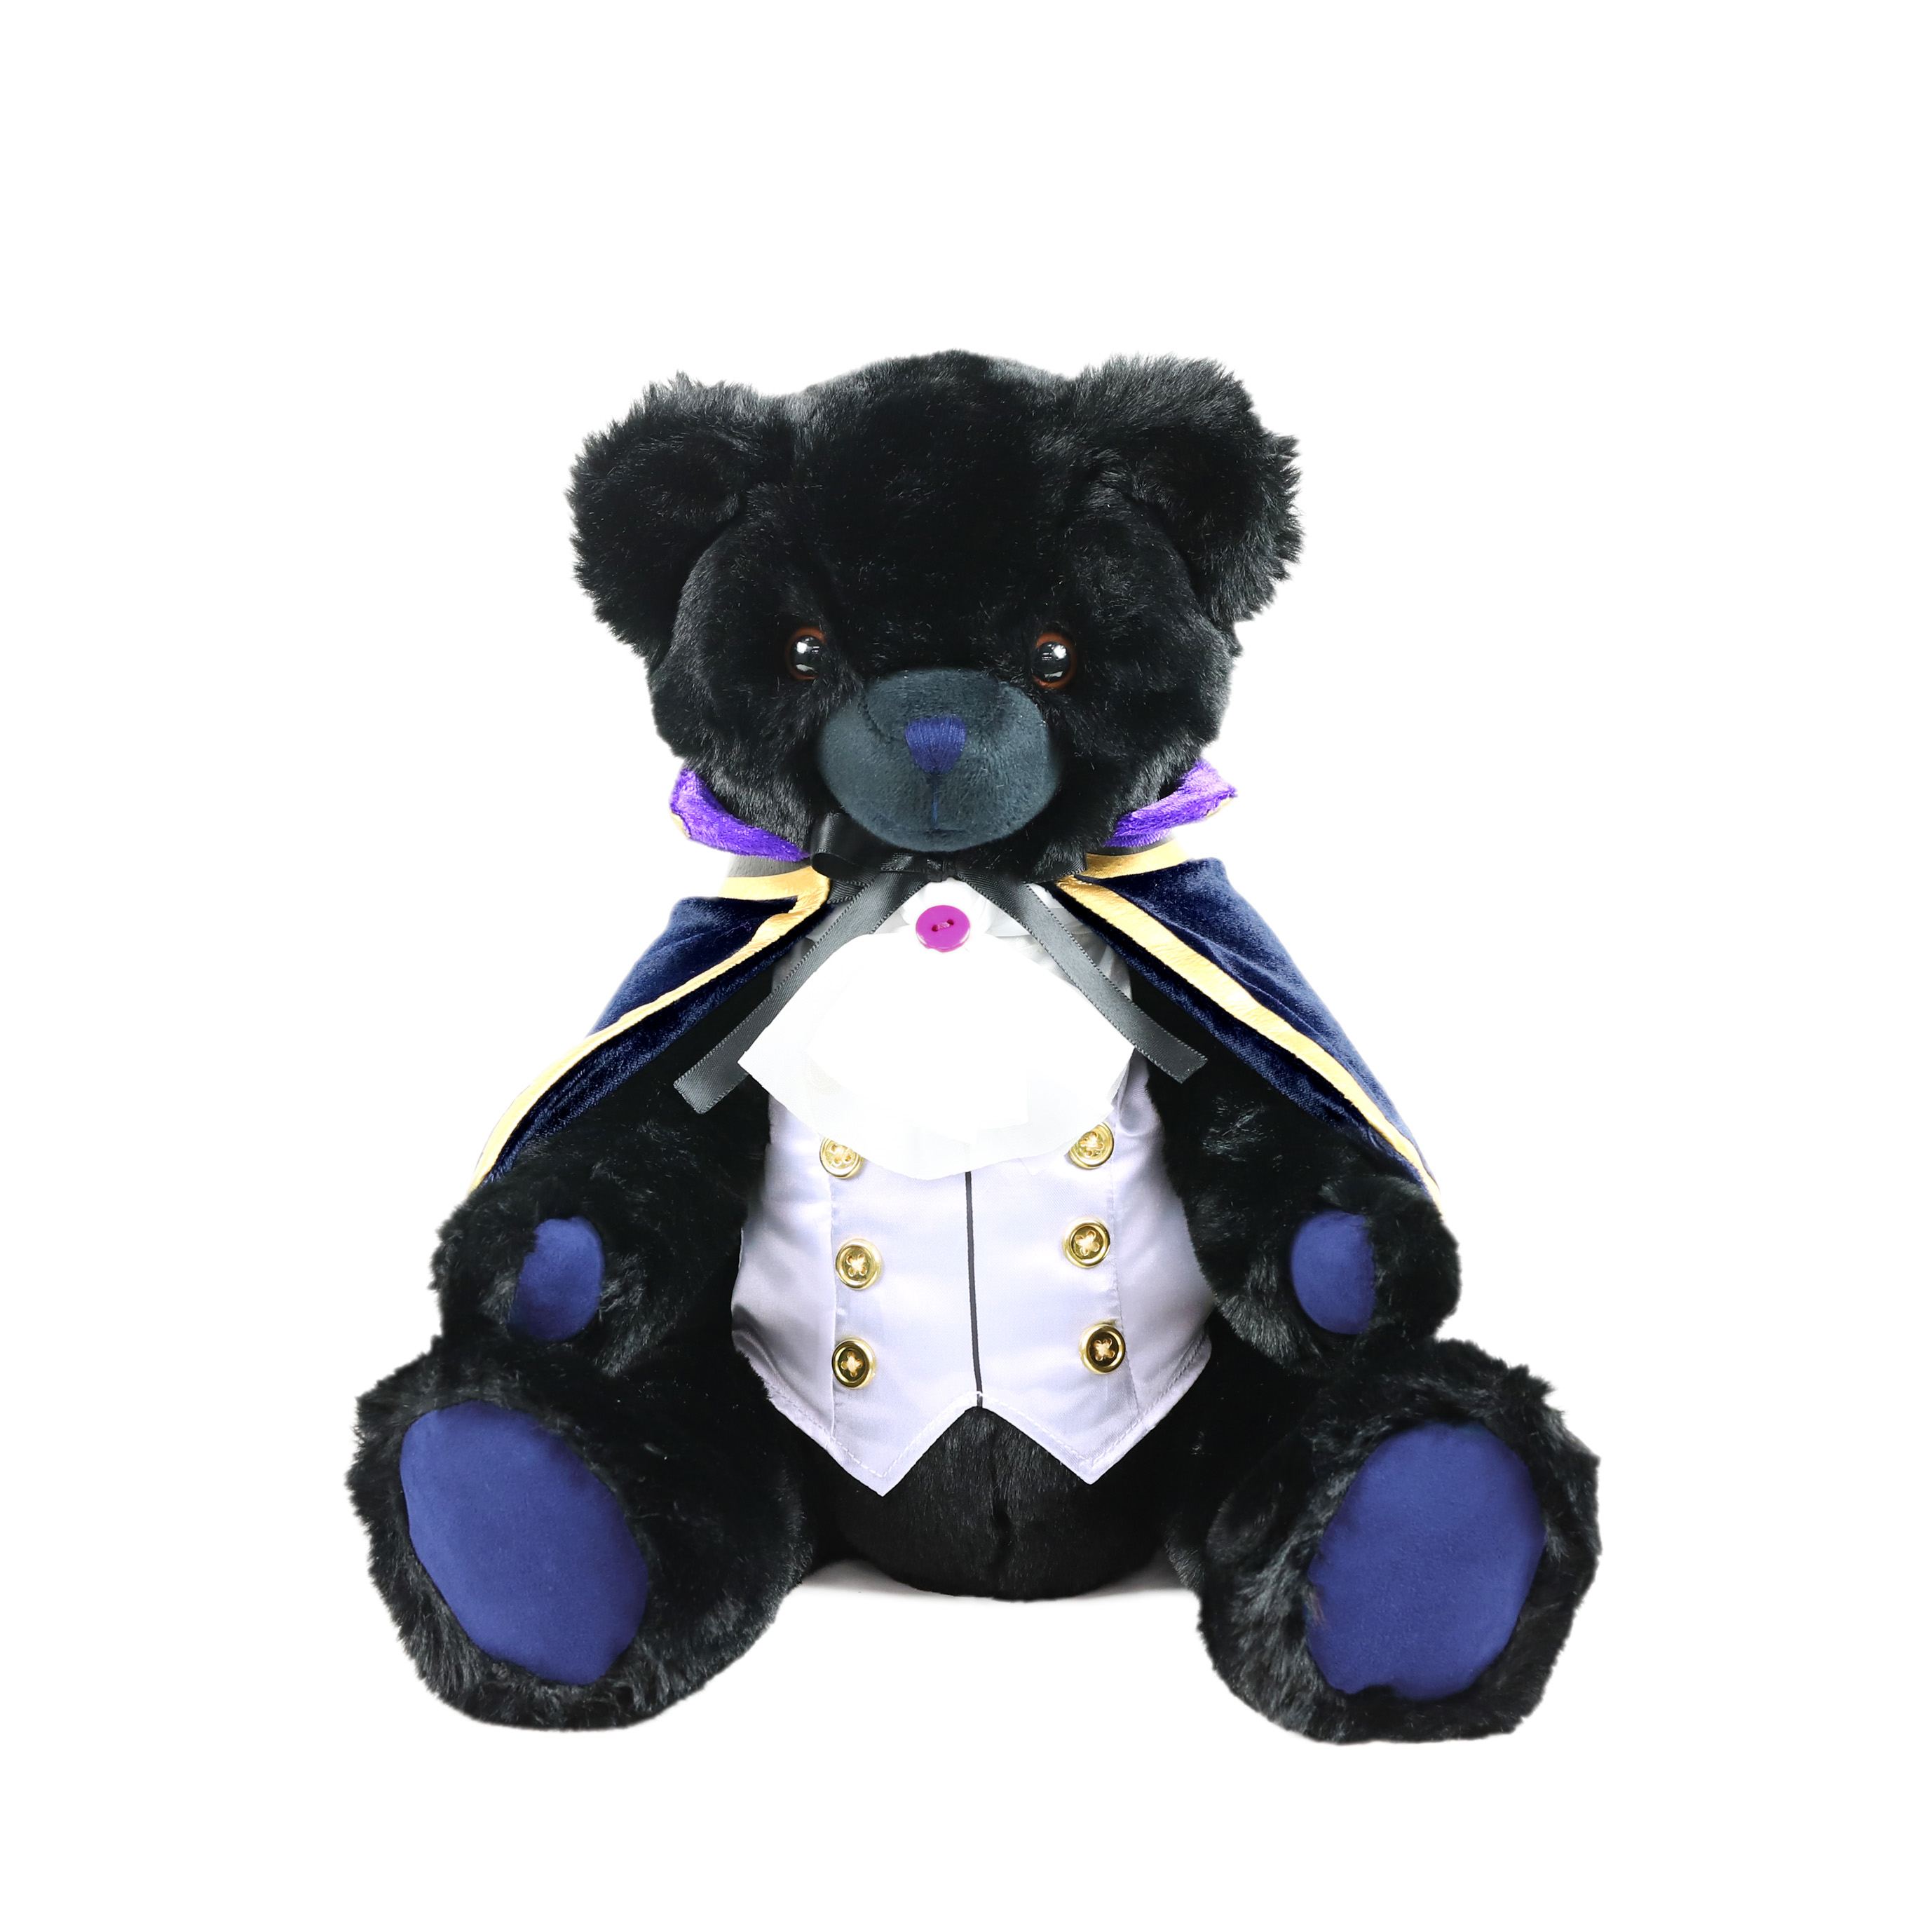 CODE GEASS LELOUCH OF THE RE;SURRECTION PLUSH: TEDDY BEAR LELOUCH OF THE RE;SURRECTION Movic